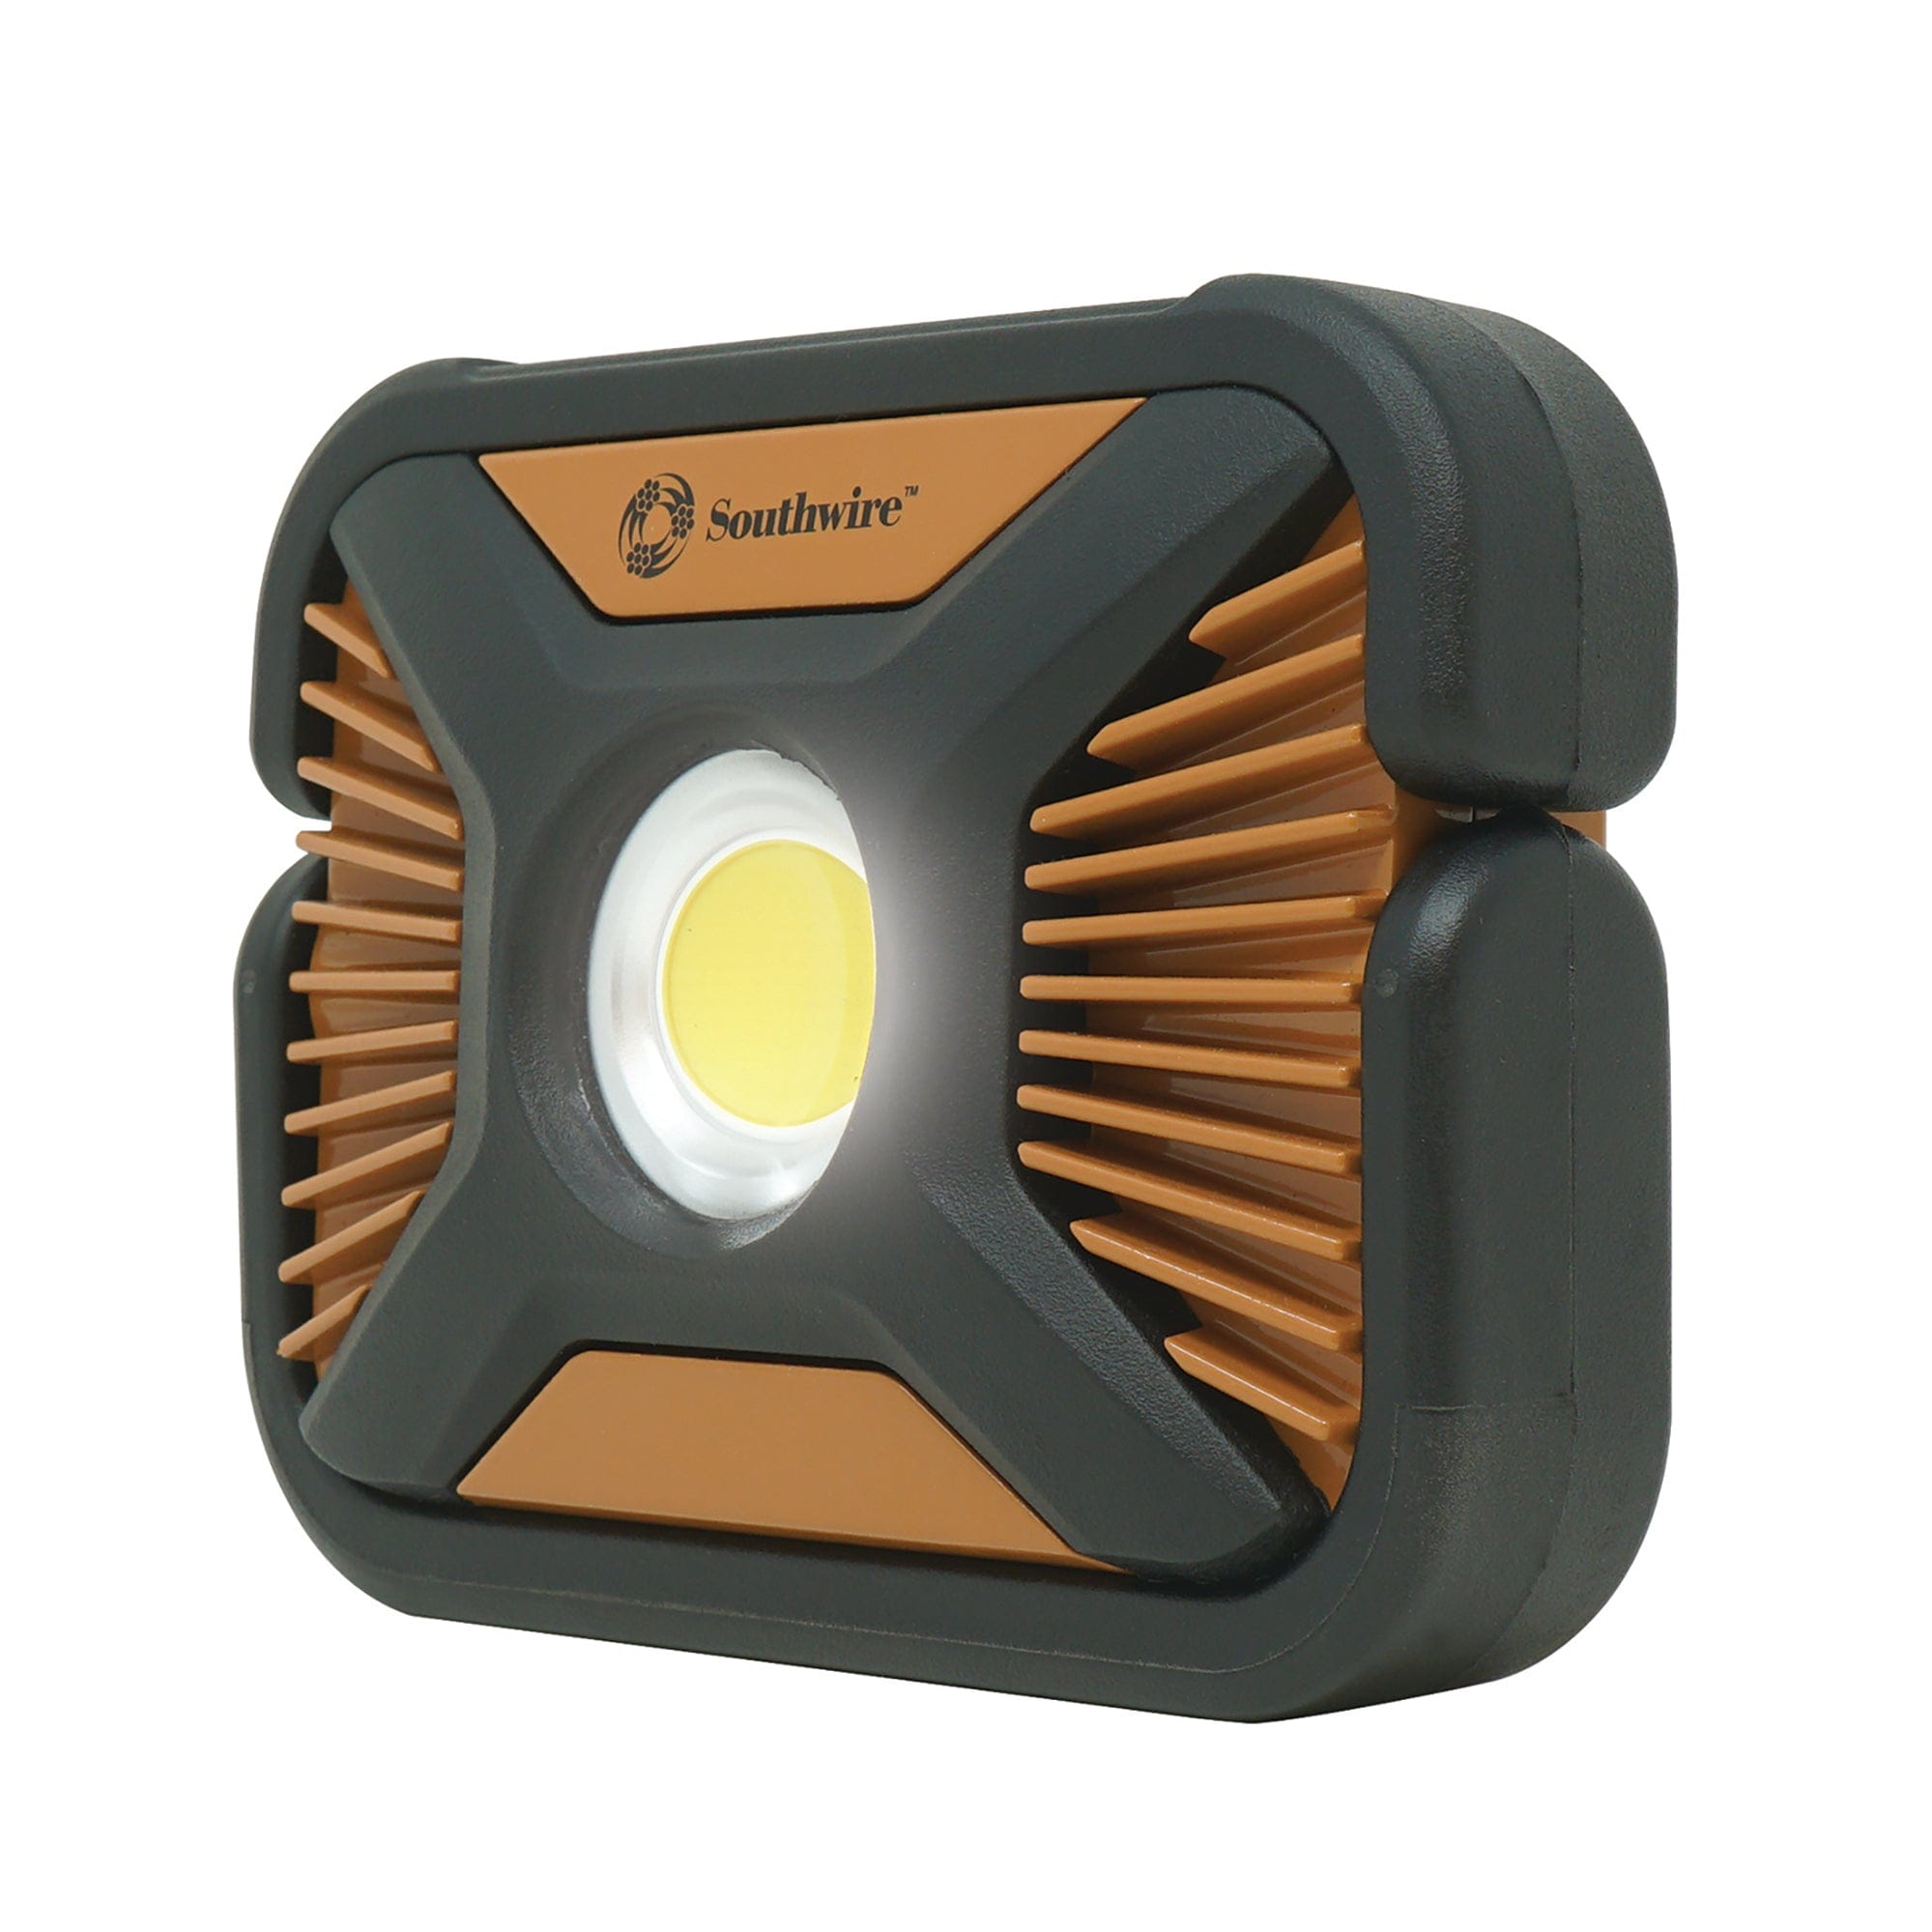 Southwire AL20RSW LED Rechargeable Work Light – 2000 Lumens